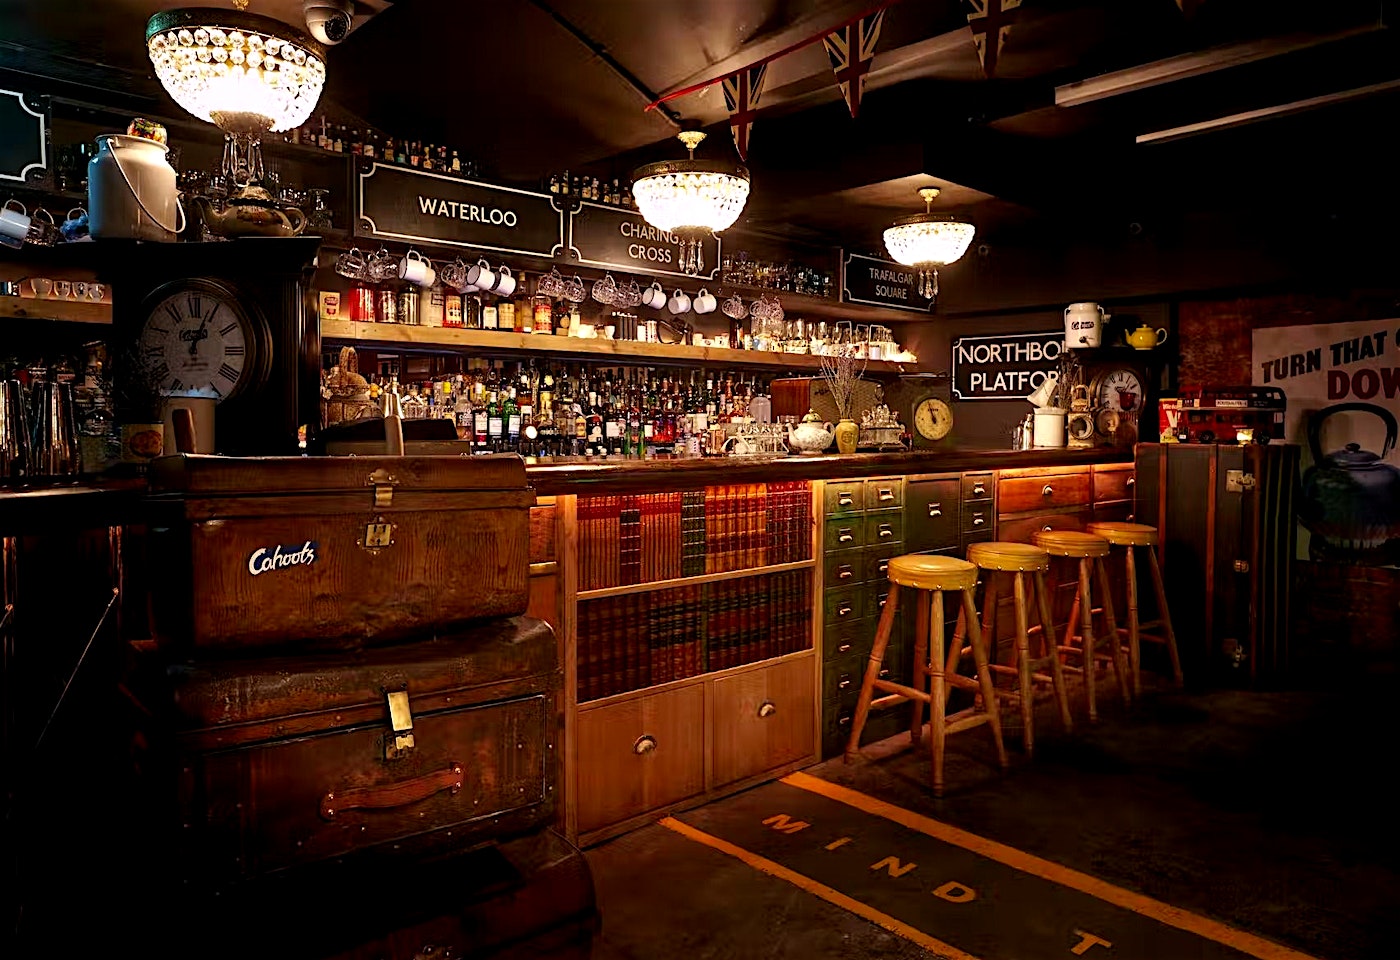 The bar at Cahoots, an underground drinking den in the Soho district of London, available for hire